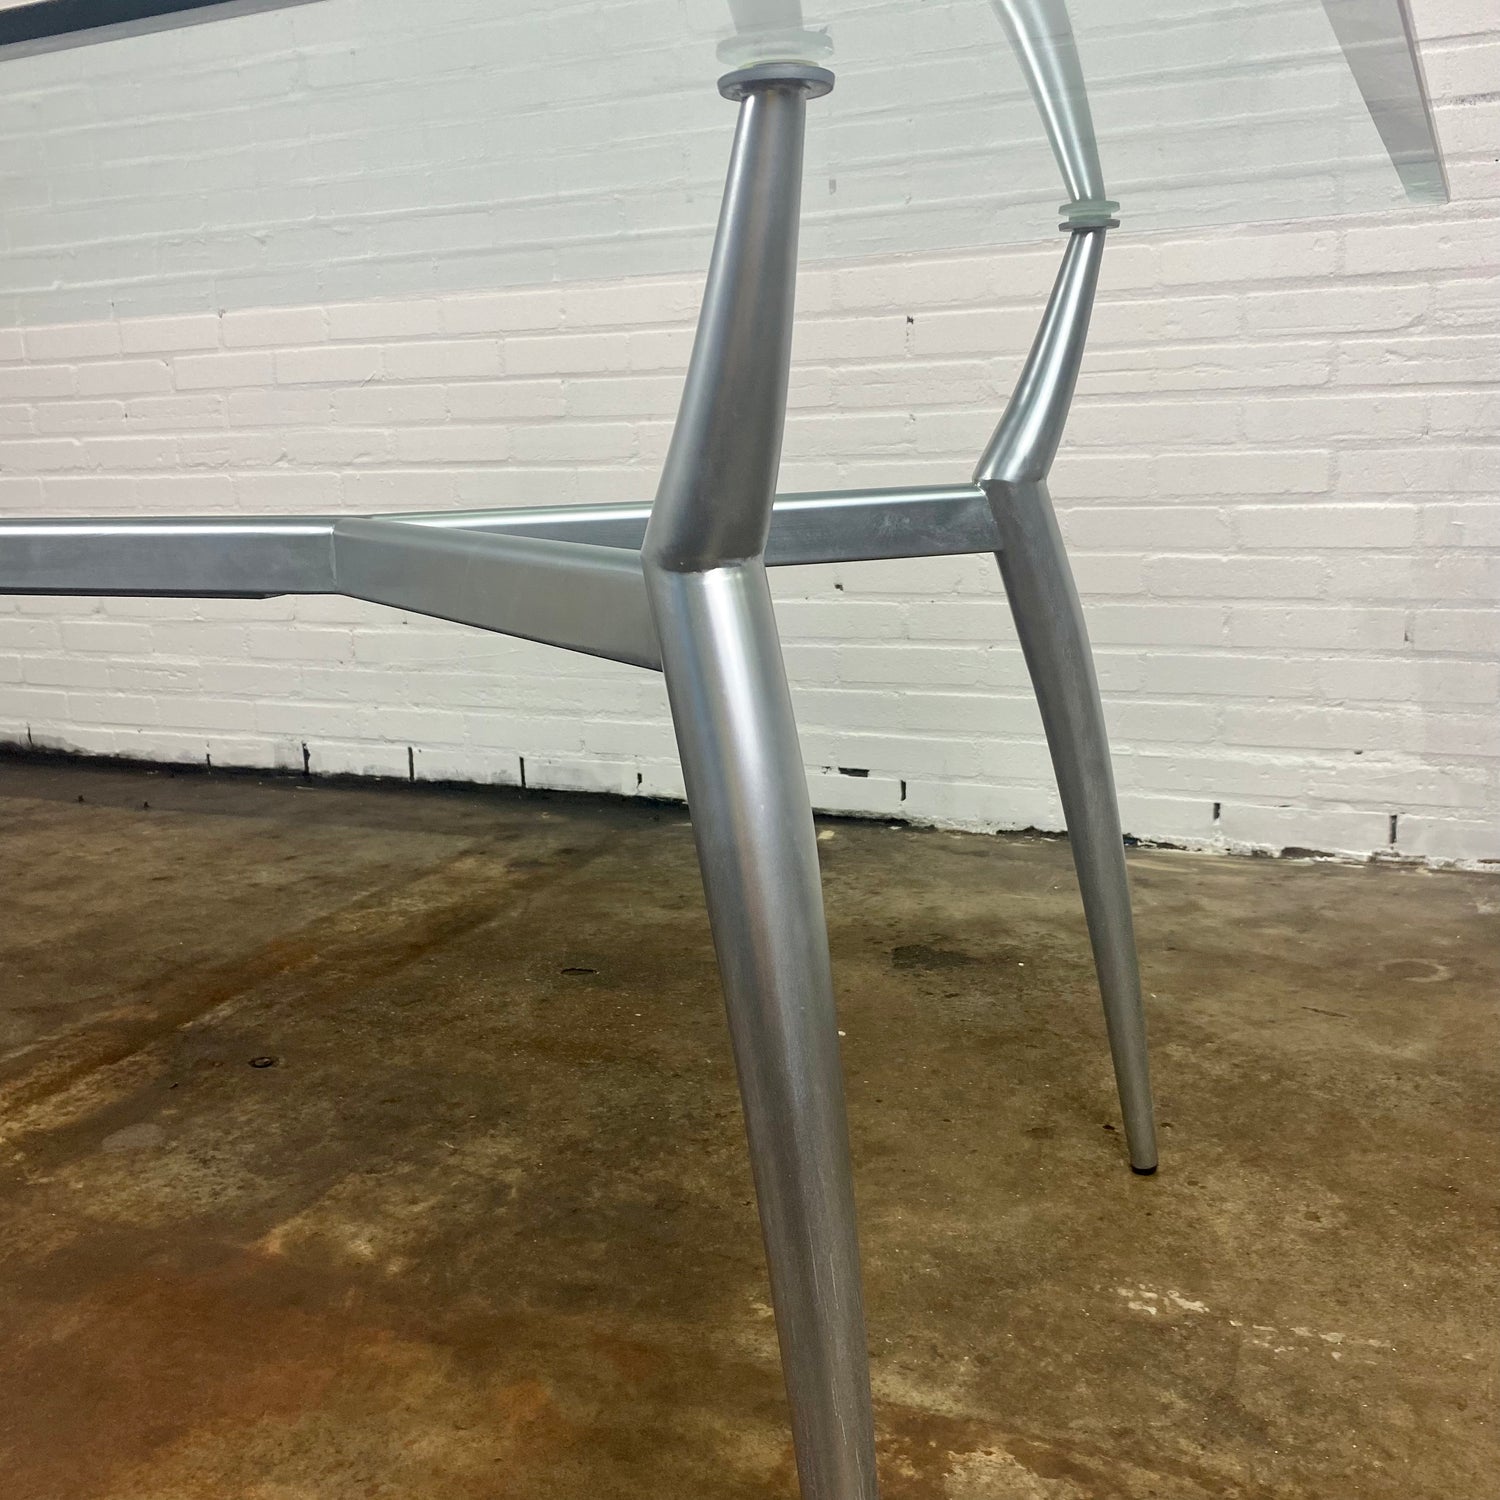 glass-dining-table-with-metal-base-knut-hesterberg